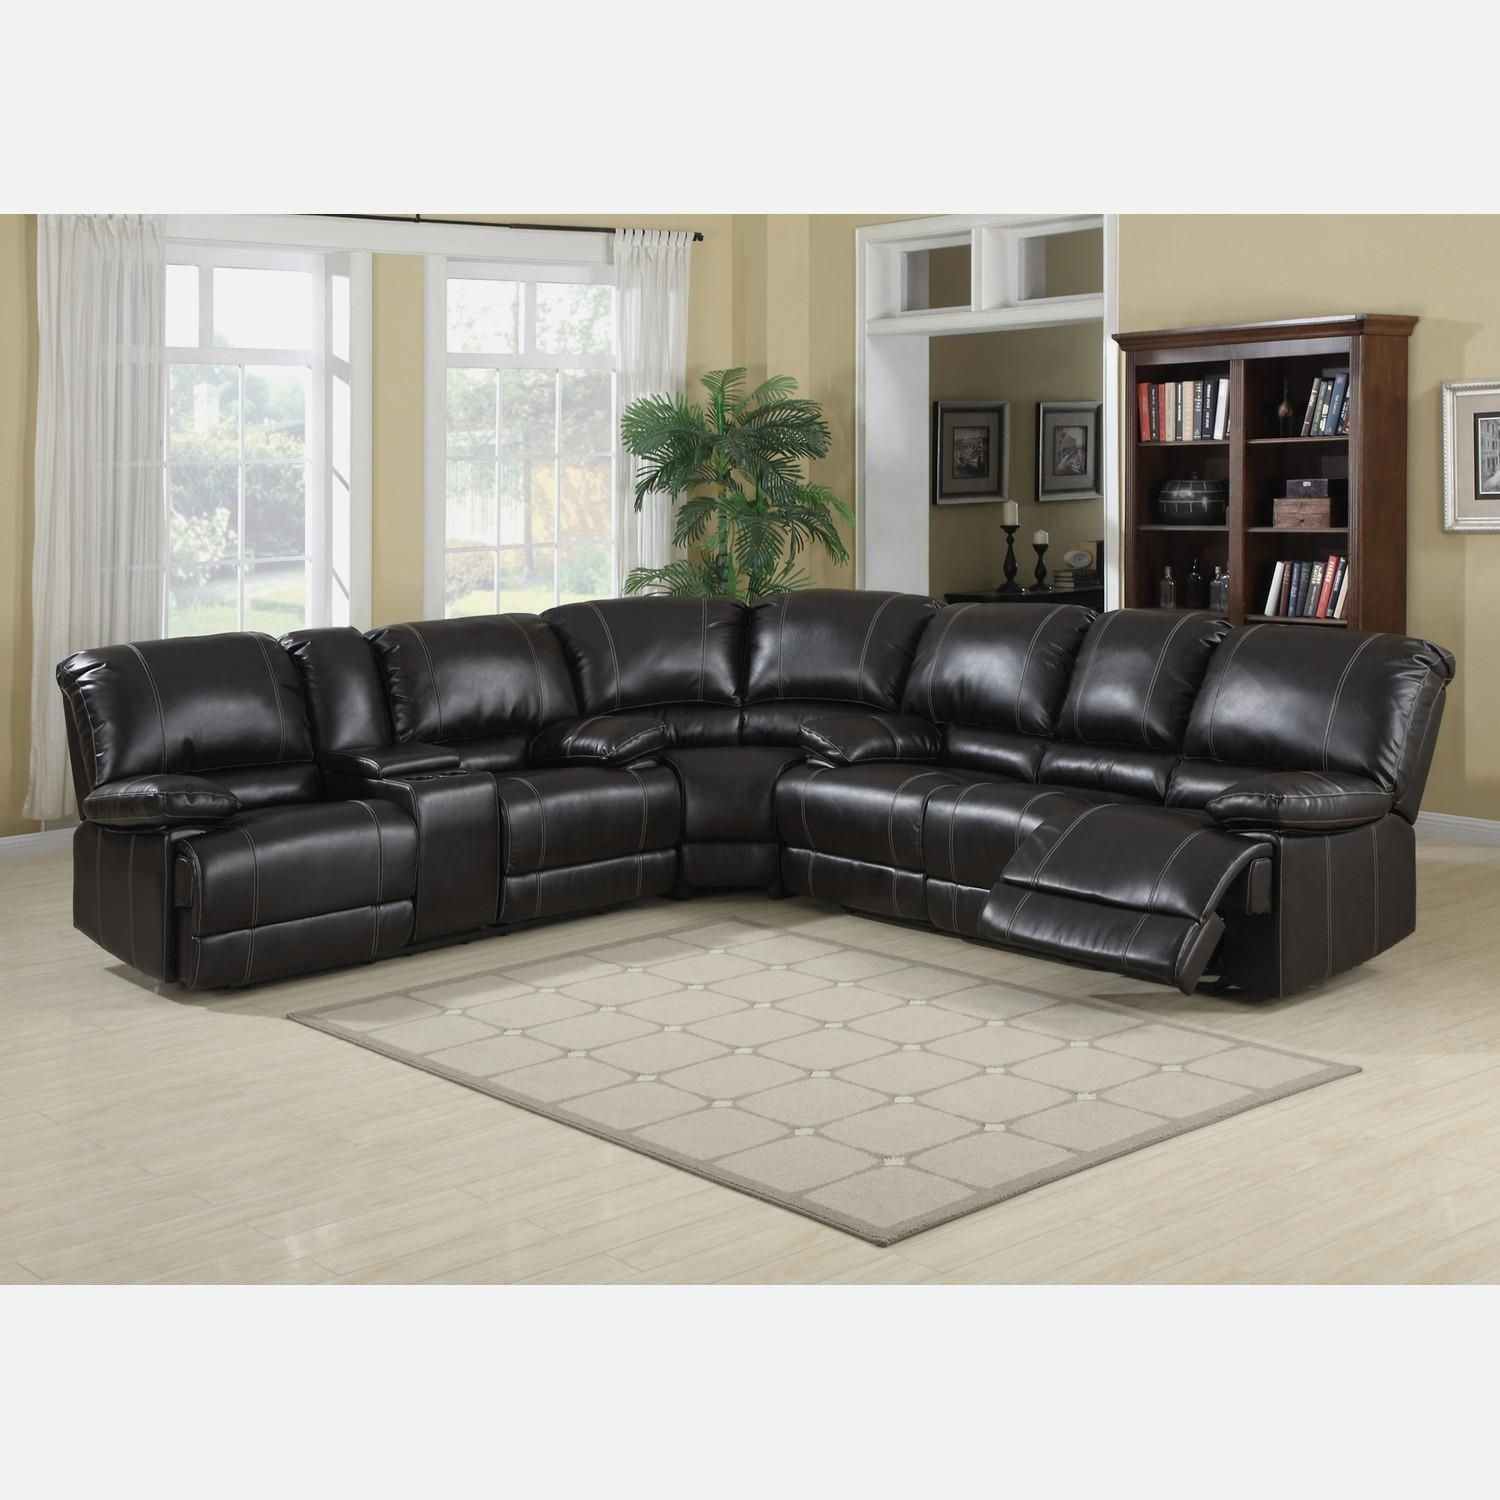 Furniture : Sectional Couches Big Lots New Sofas Big Lots Sofa And Inside Sectional Sofas At Big Lots (Photo 15 of 15)